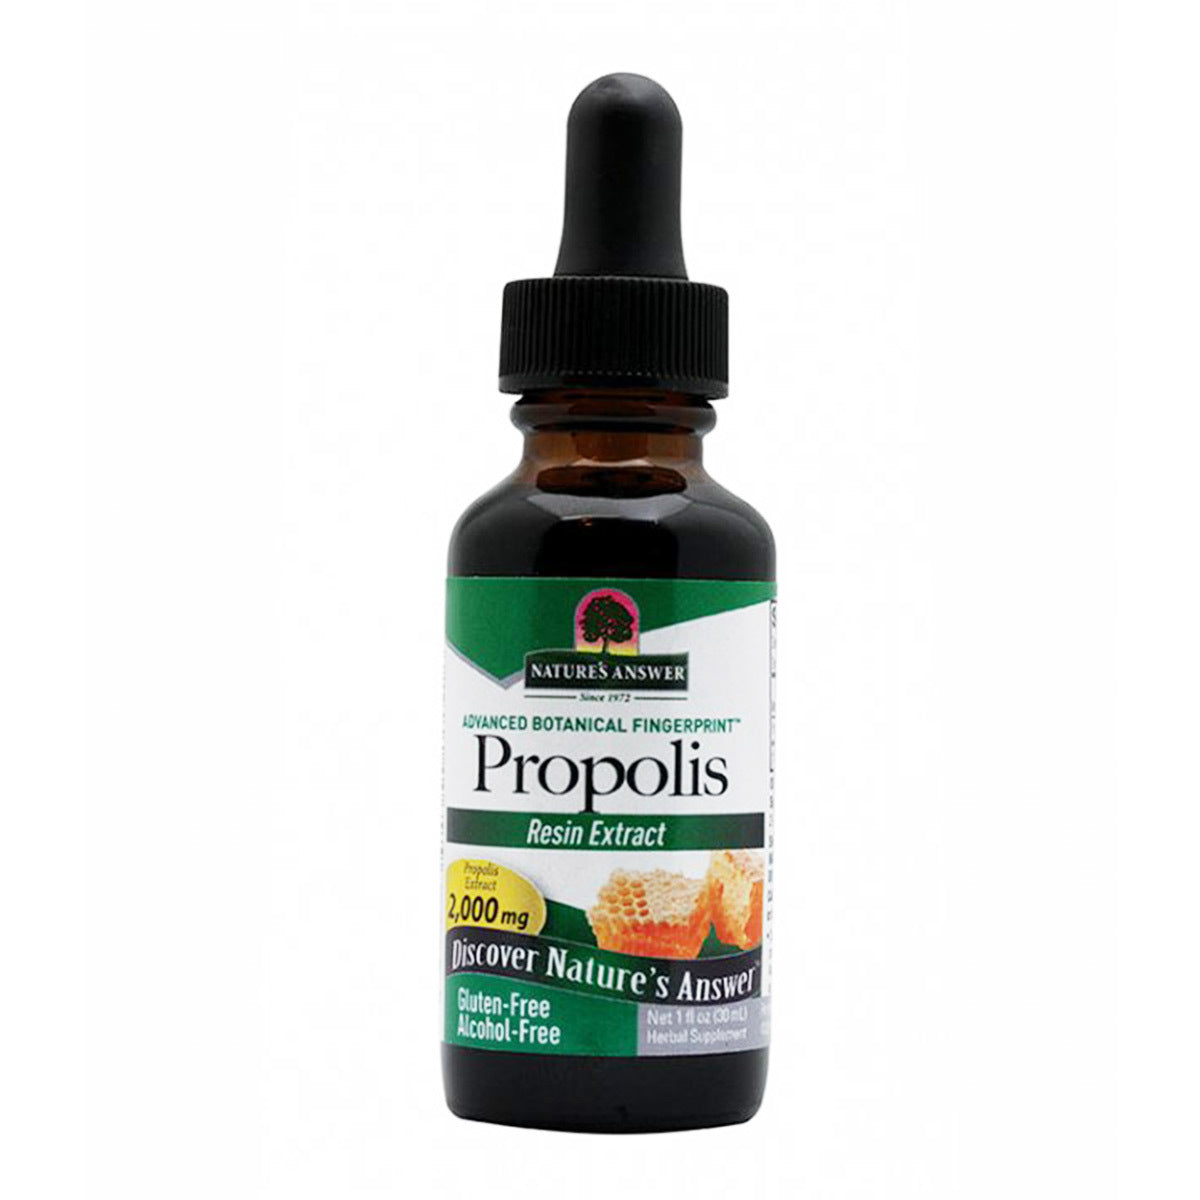 Primary image of Propolis - Alcohol Free